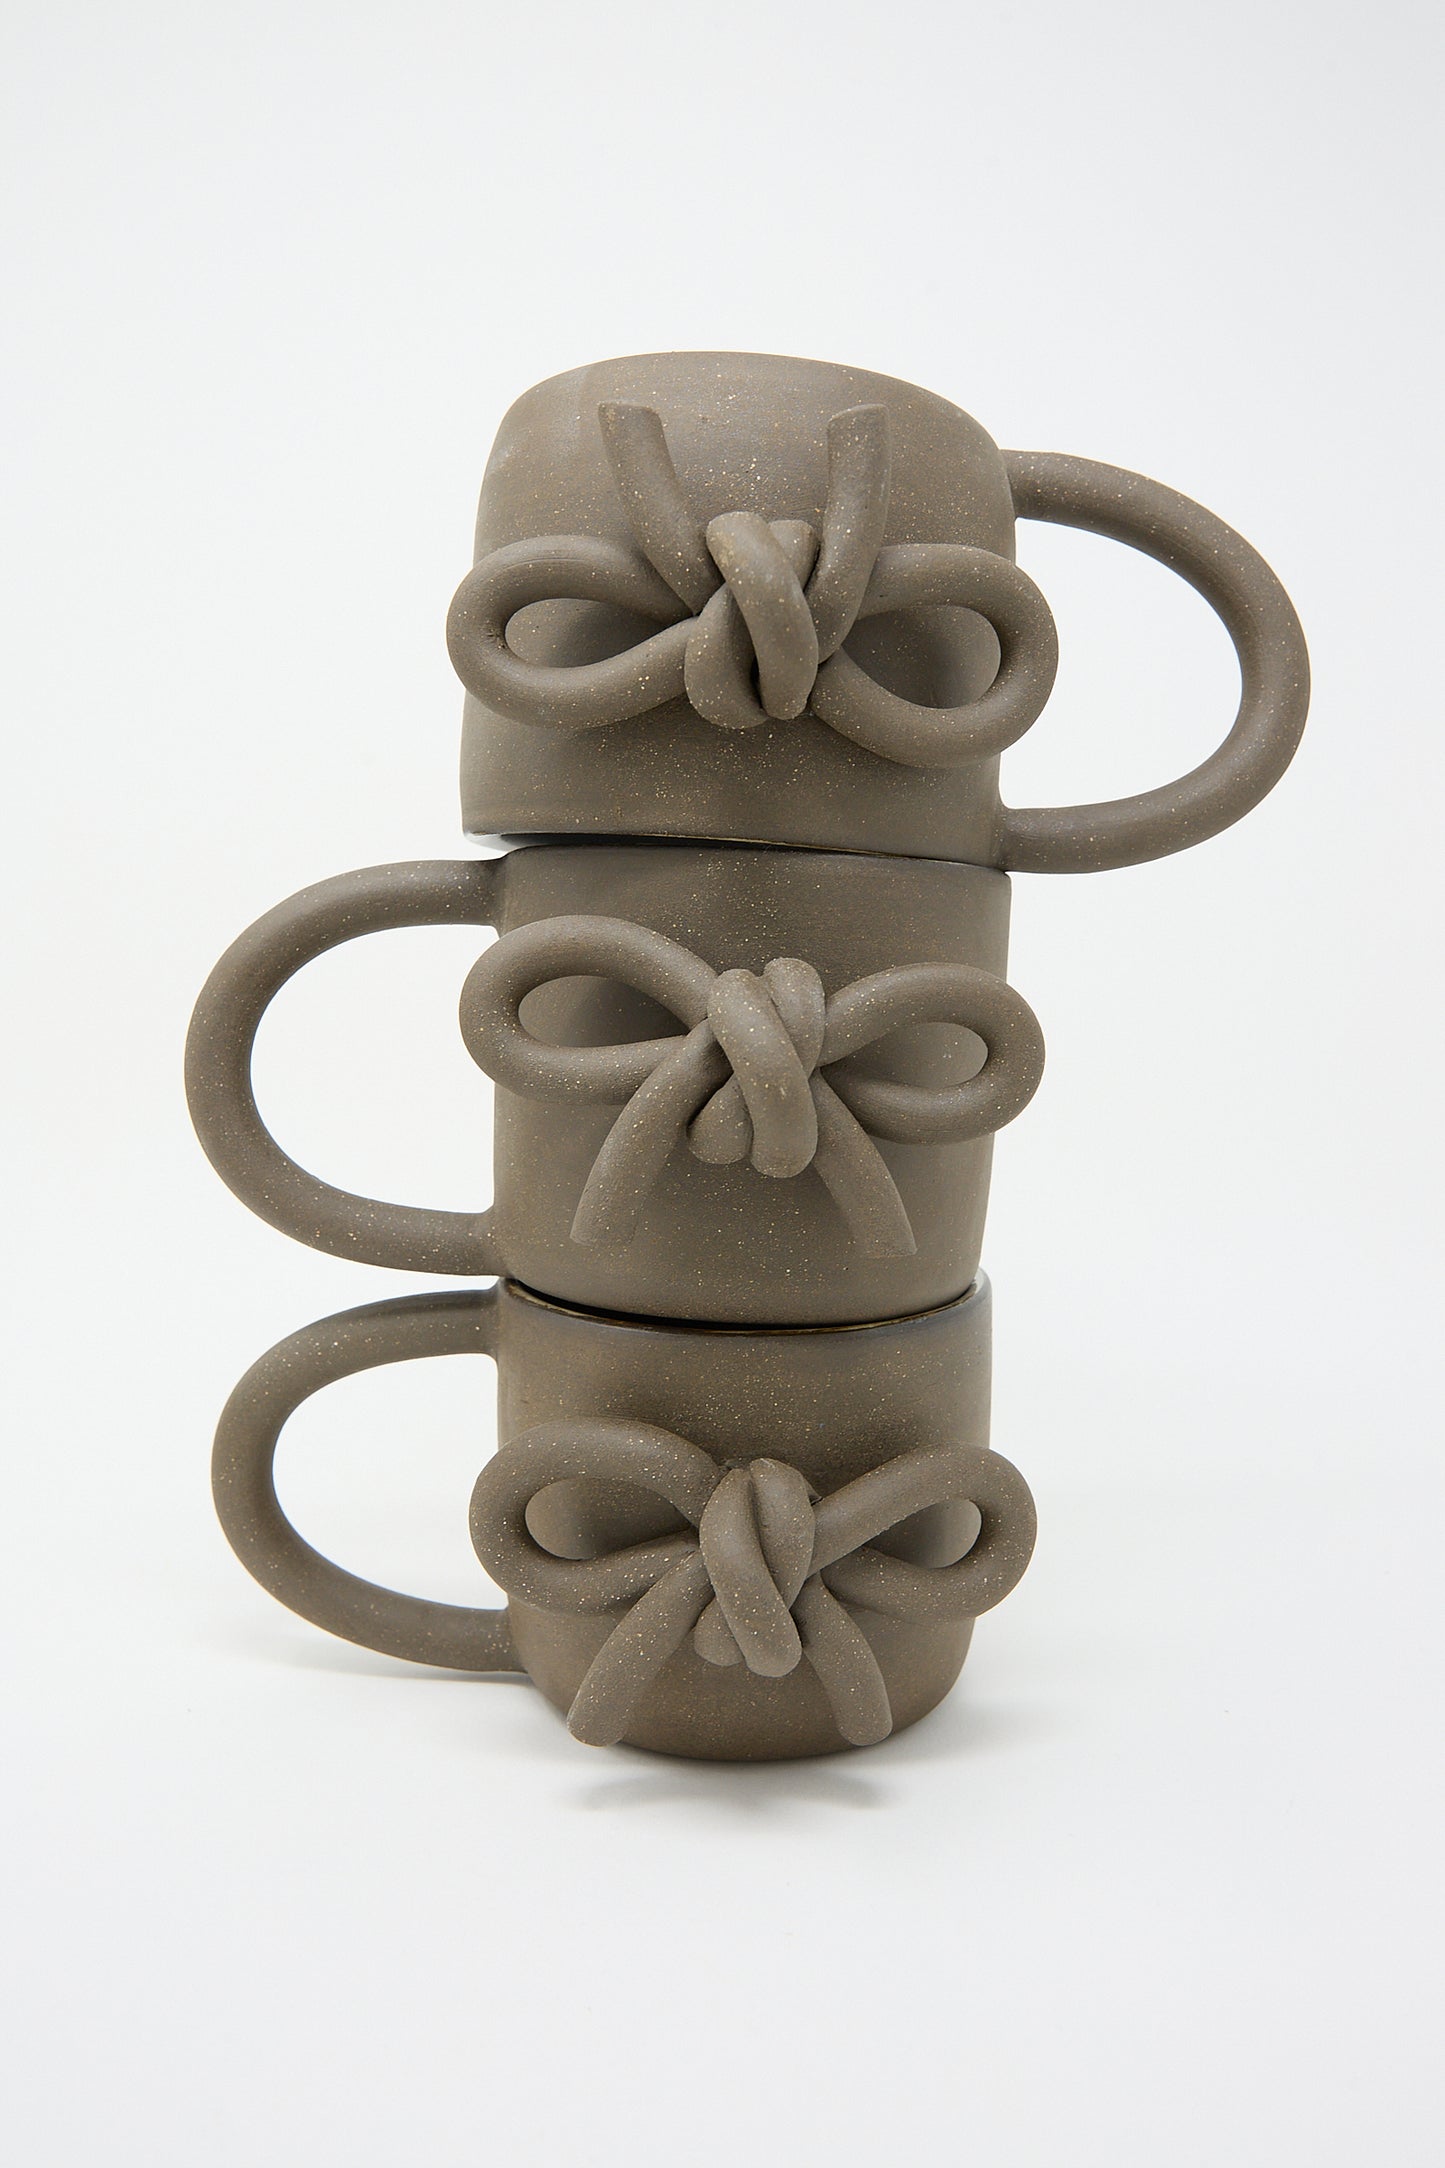 Four stacked Lost Quarry hand-formed ceramic mugs in black, each with a decorative bow design on the handle, against a white background.